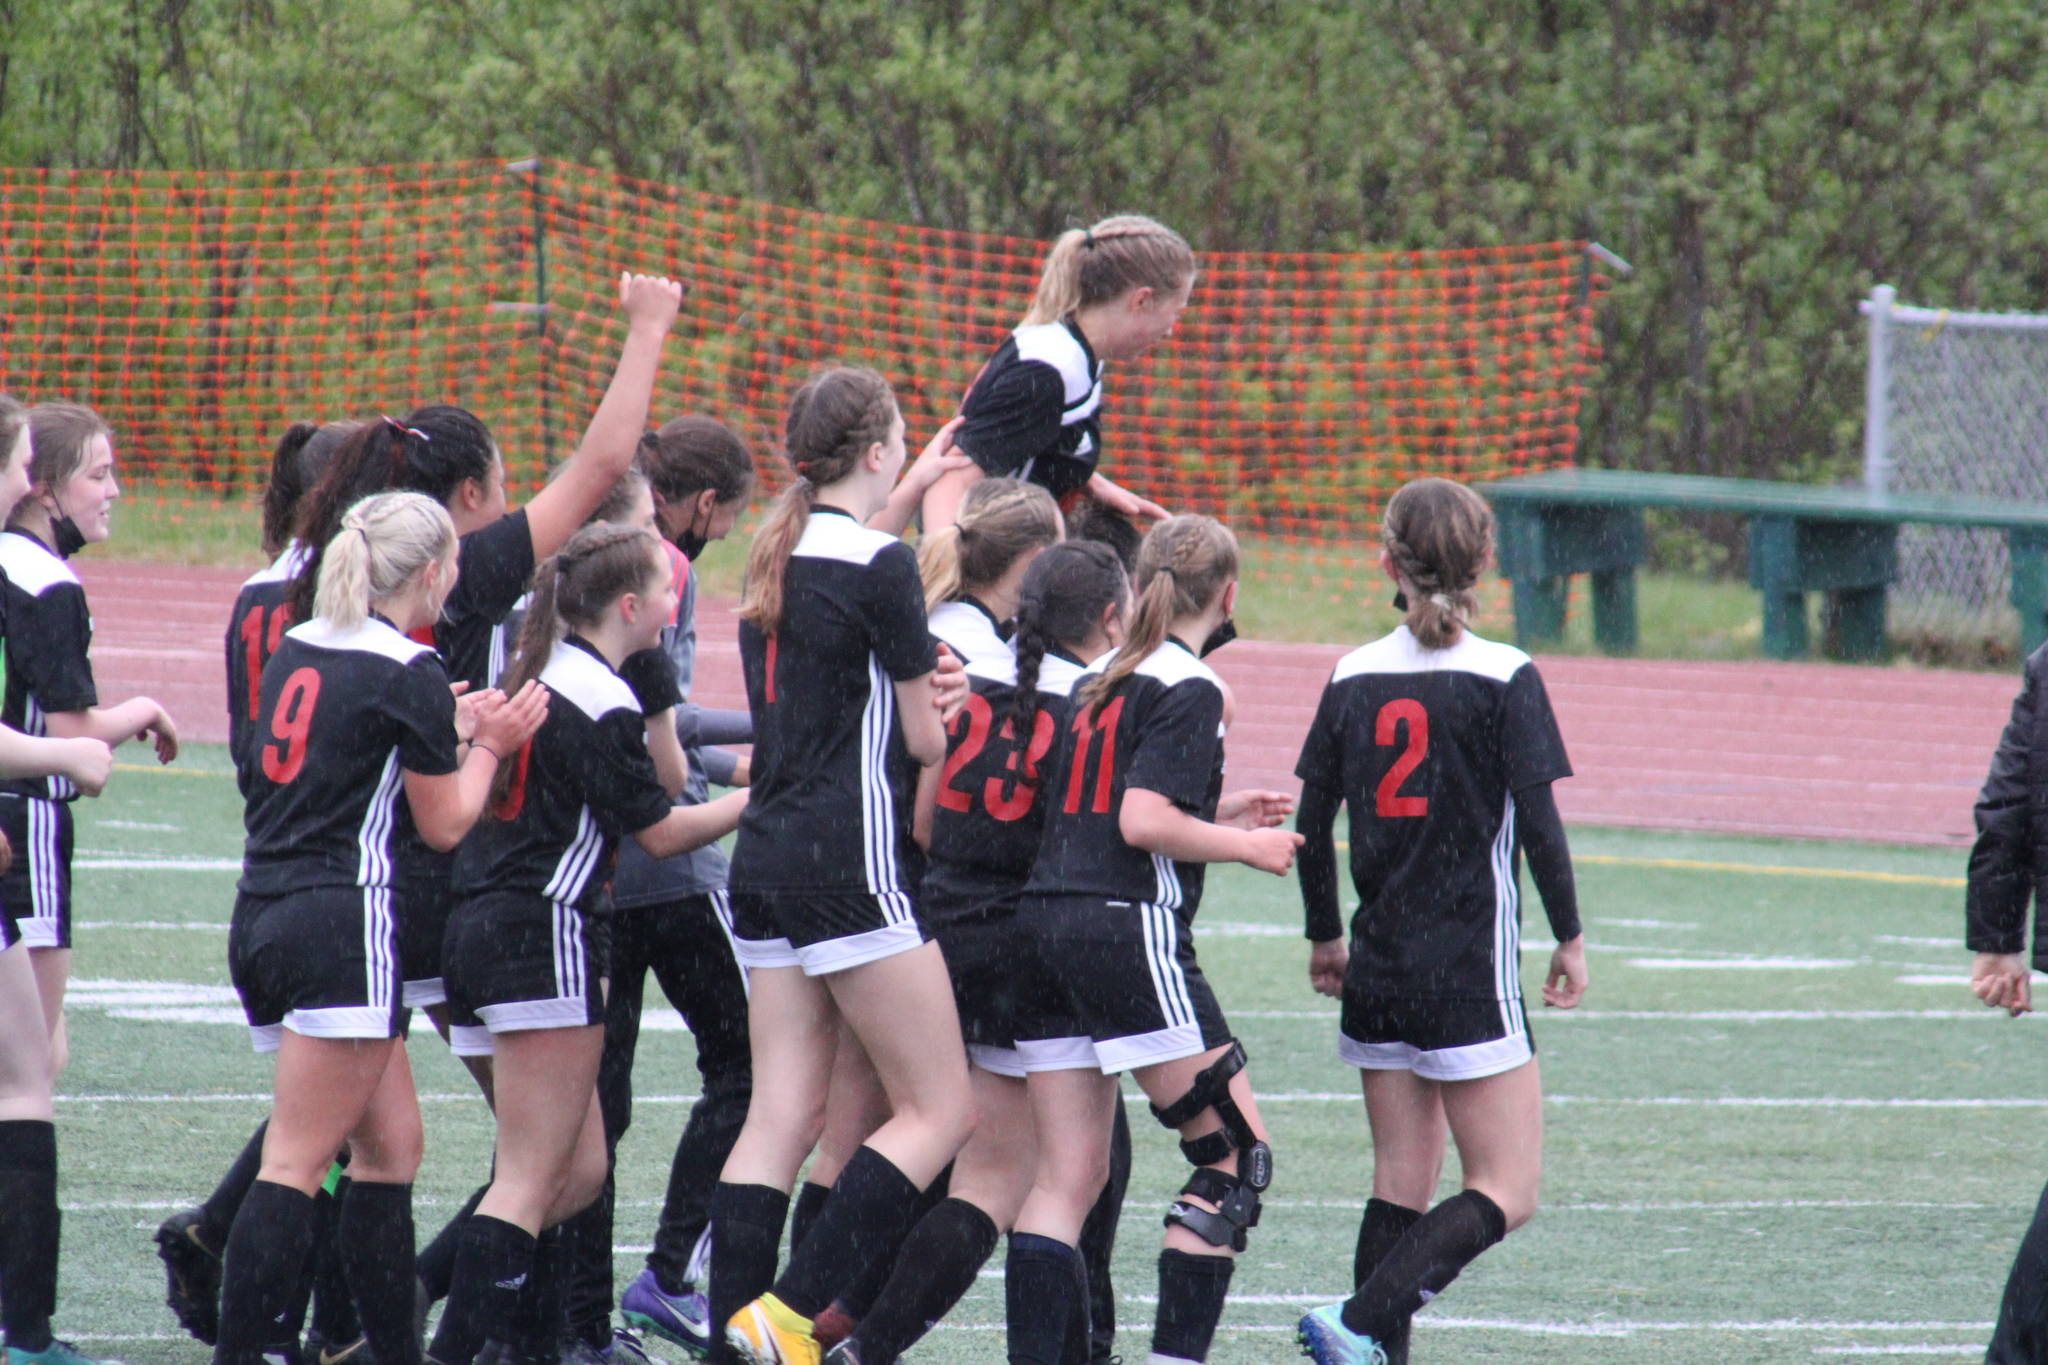 Members of the JDHS girls soccer team celebrate after clinching the state soccer title. The team capped a perfect season by besting the Soldotna Stars 5-1 to clinch the Division II title. (Courtesy Photo/ Carolyn Kelley)